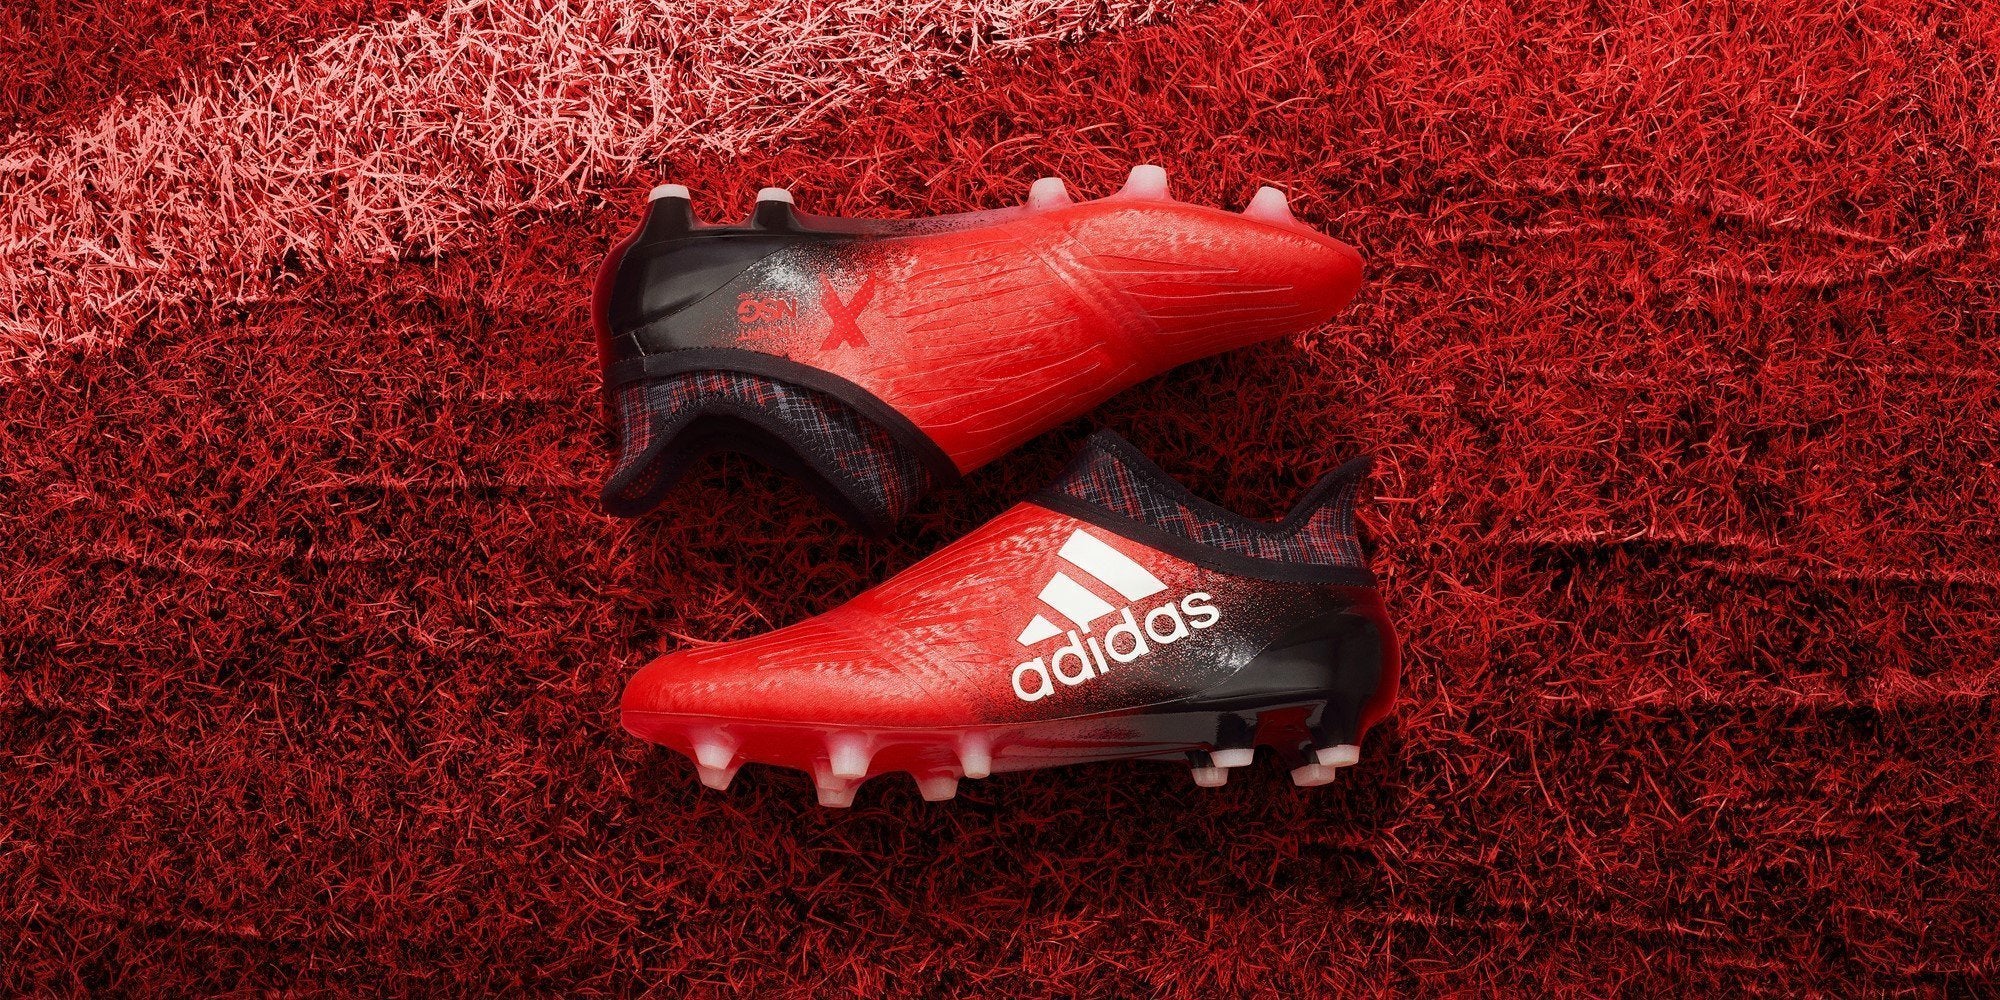 Adidas Soccer Cleats - Mobile X 16.1